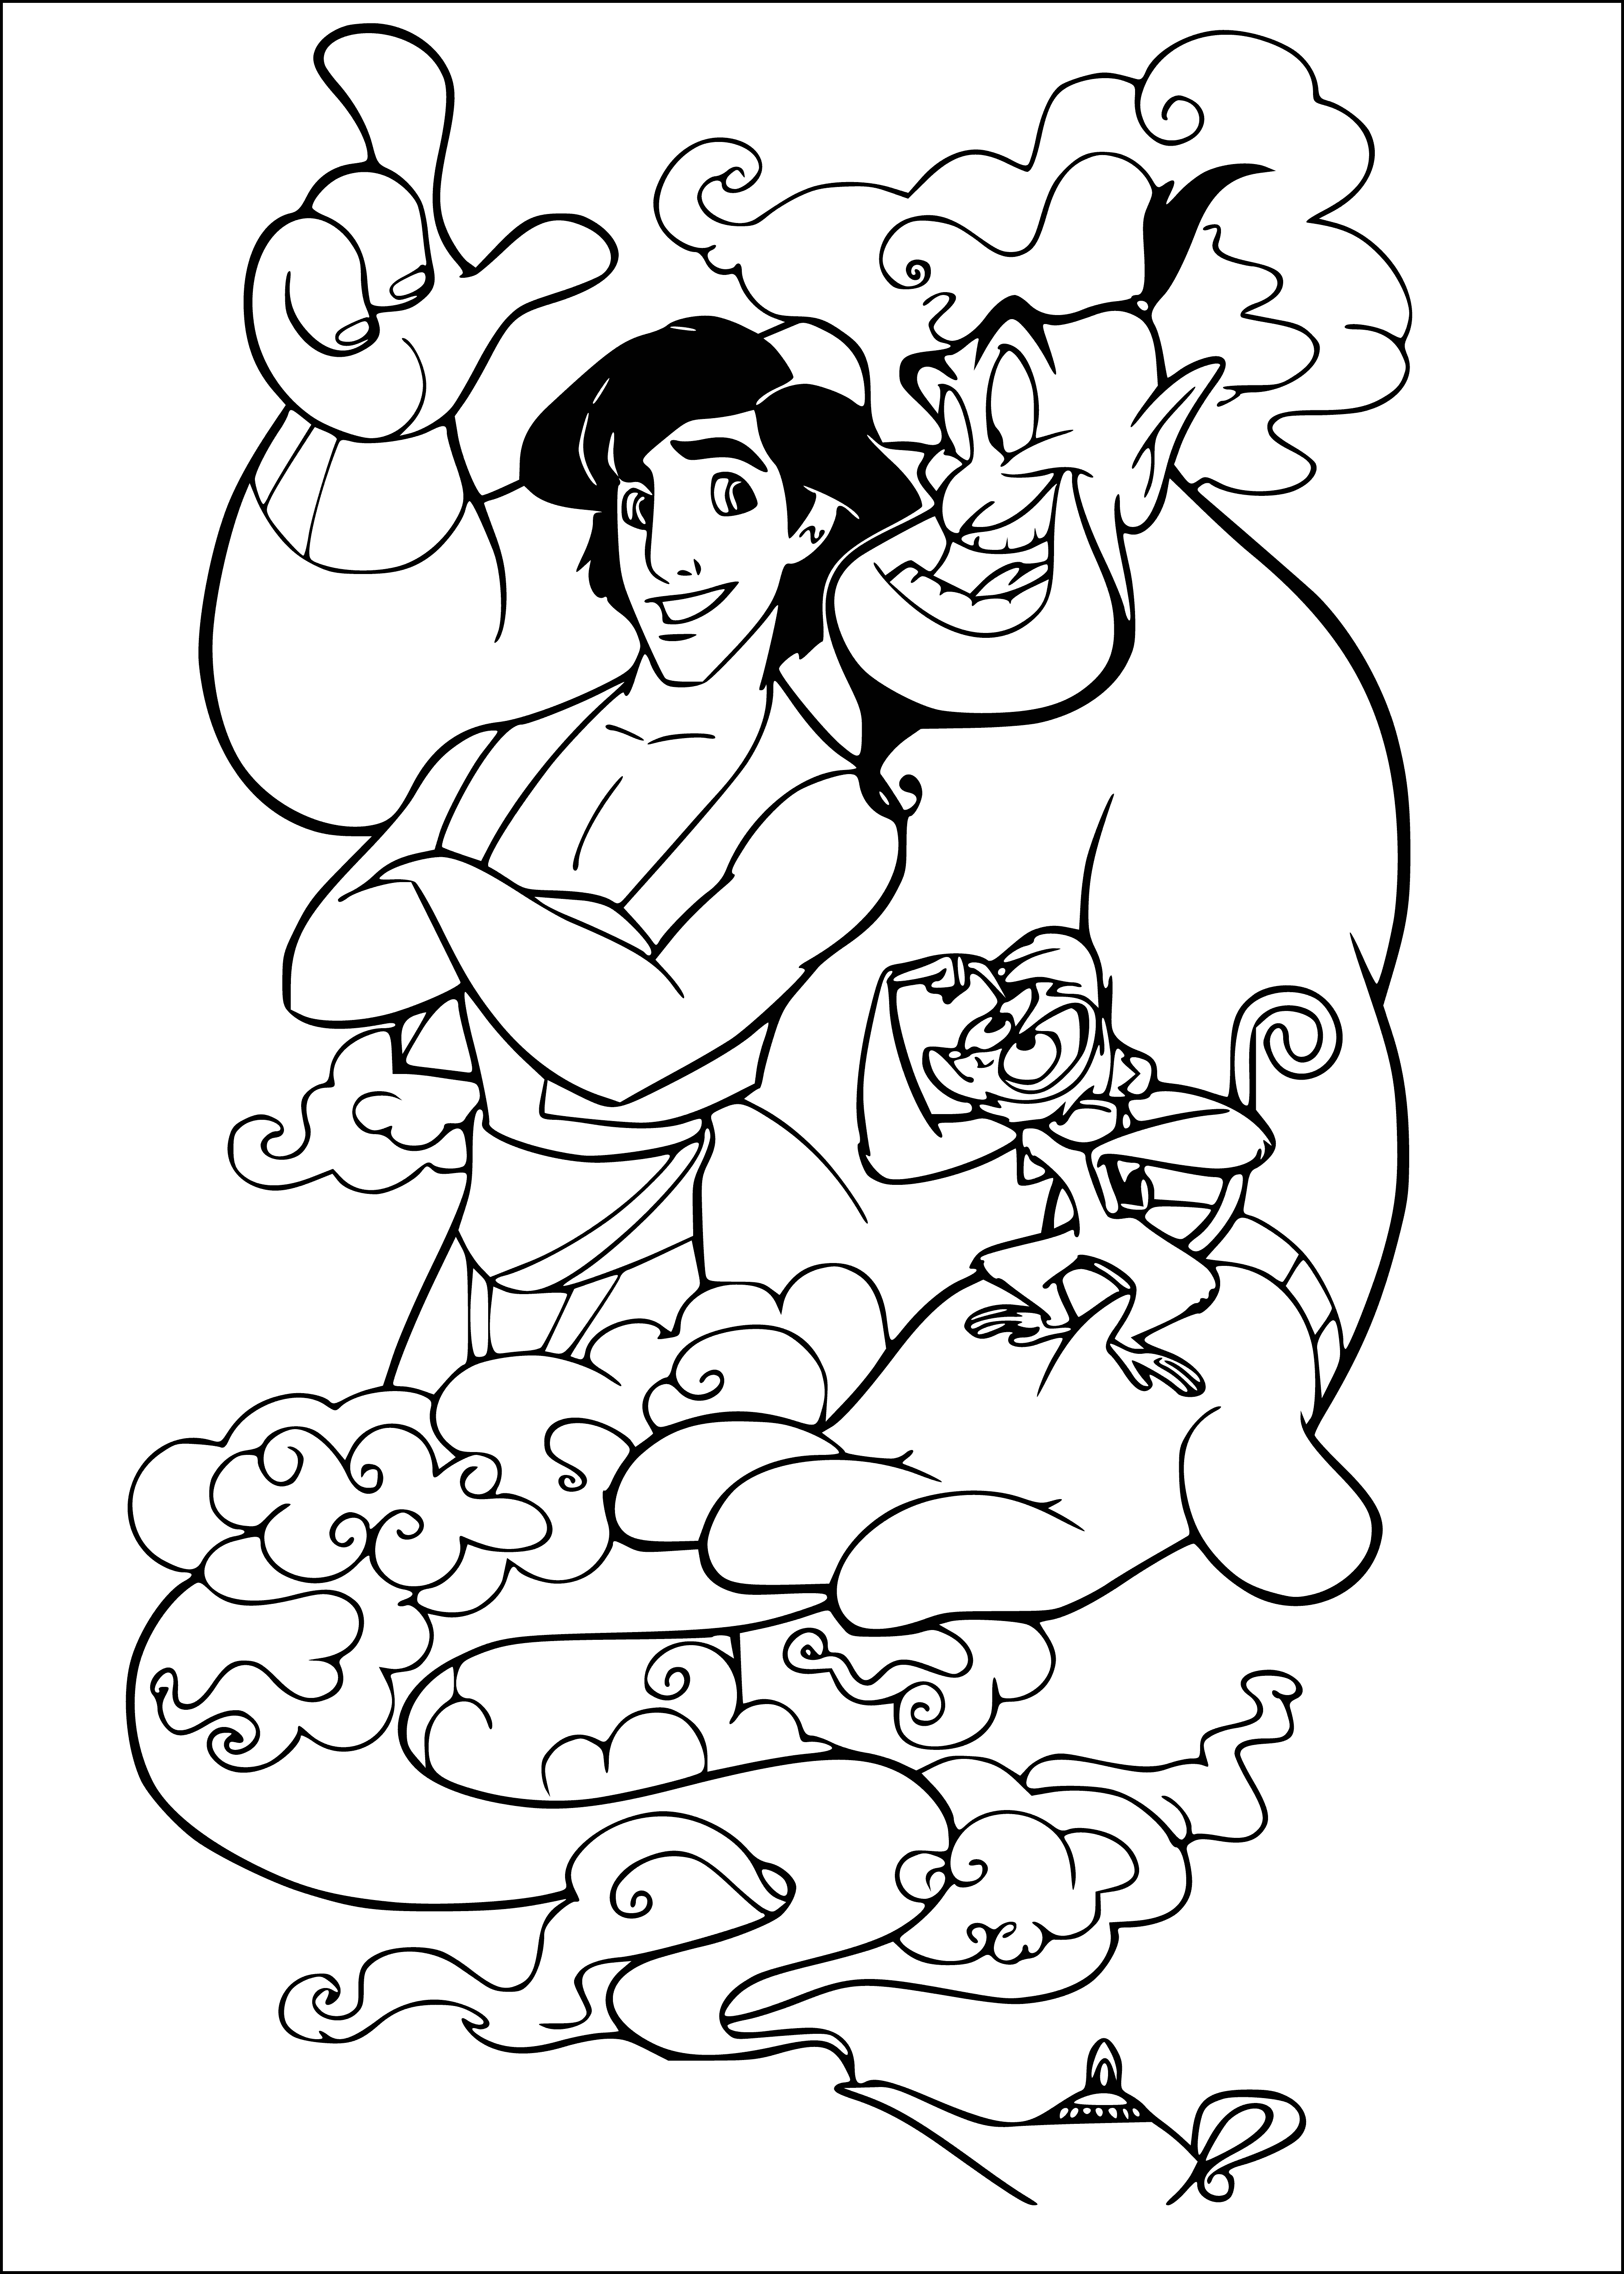 Ginny and Aladdin coloring page